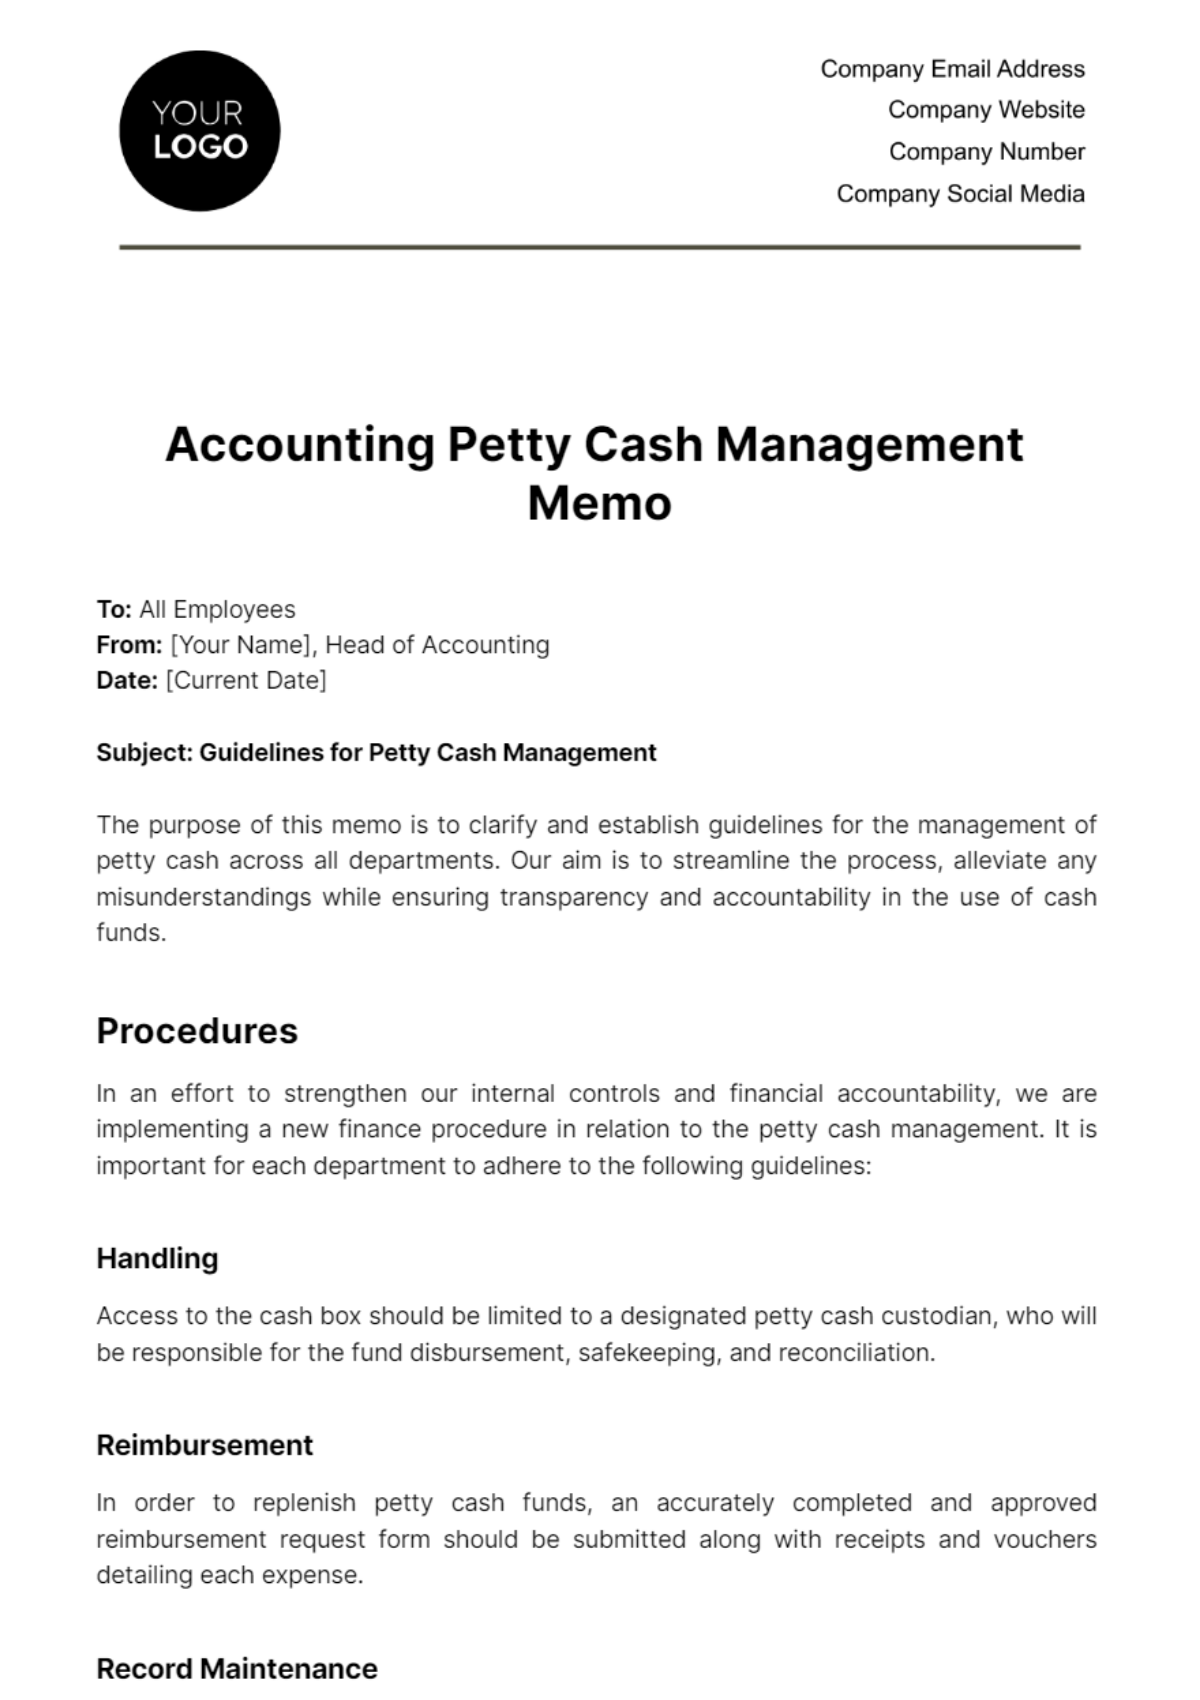 Accounting Petty Cash Management Memo Template